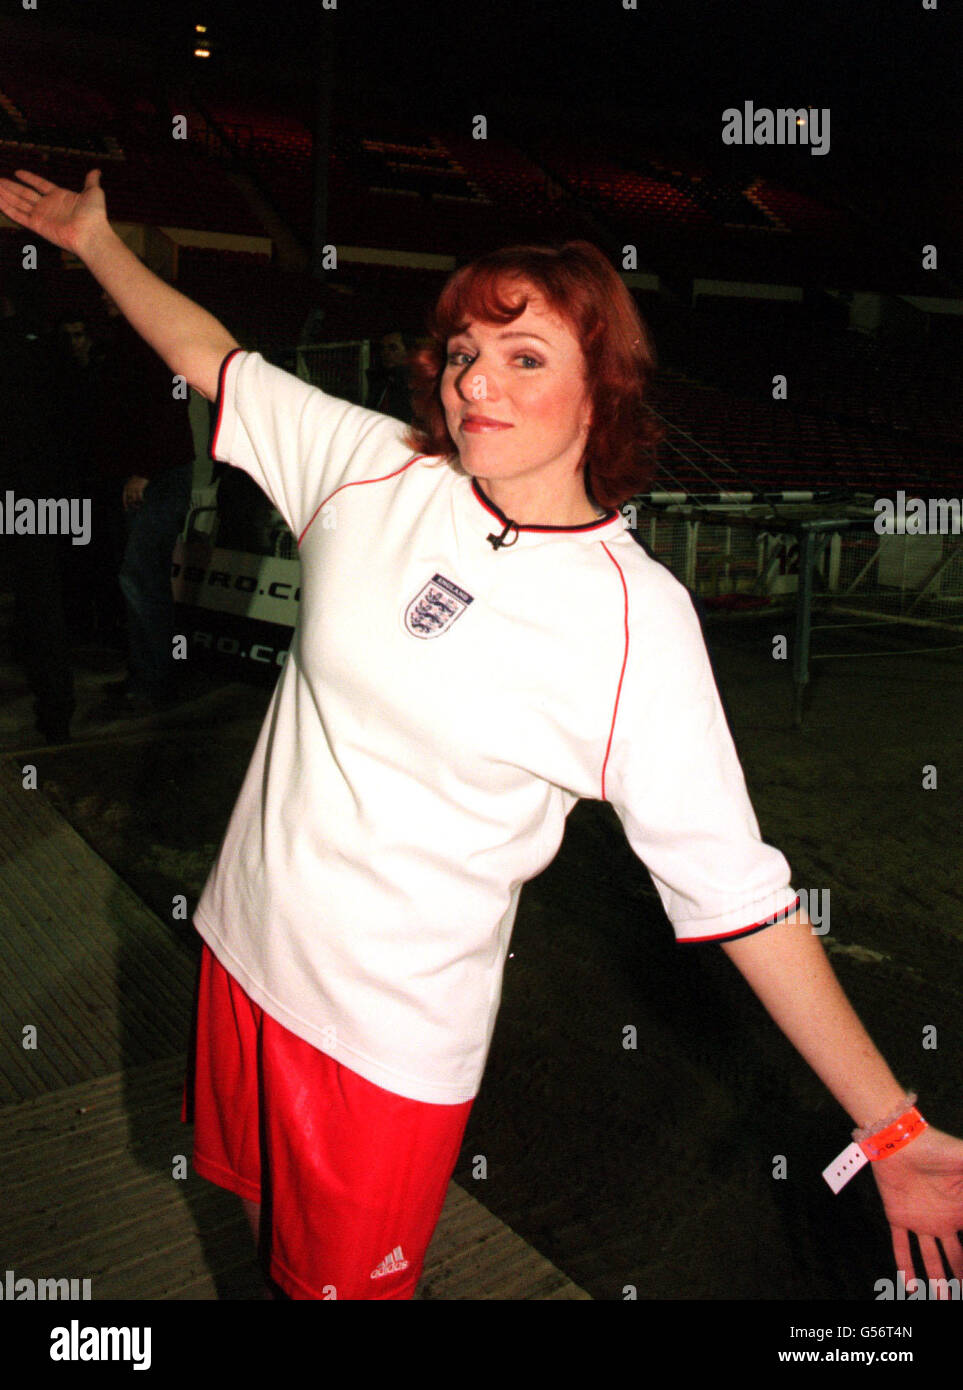 Tara Newley at the last ever England v Scotland football match to be played between the Twin Towers of Wembley Stadium. The celebrity match was to celebrate the launch of Umbro.com, the new online news and retail site for football fans. Stock Photo